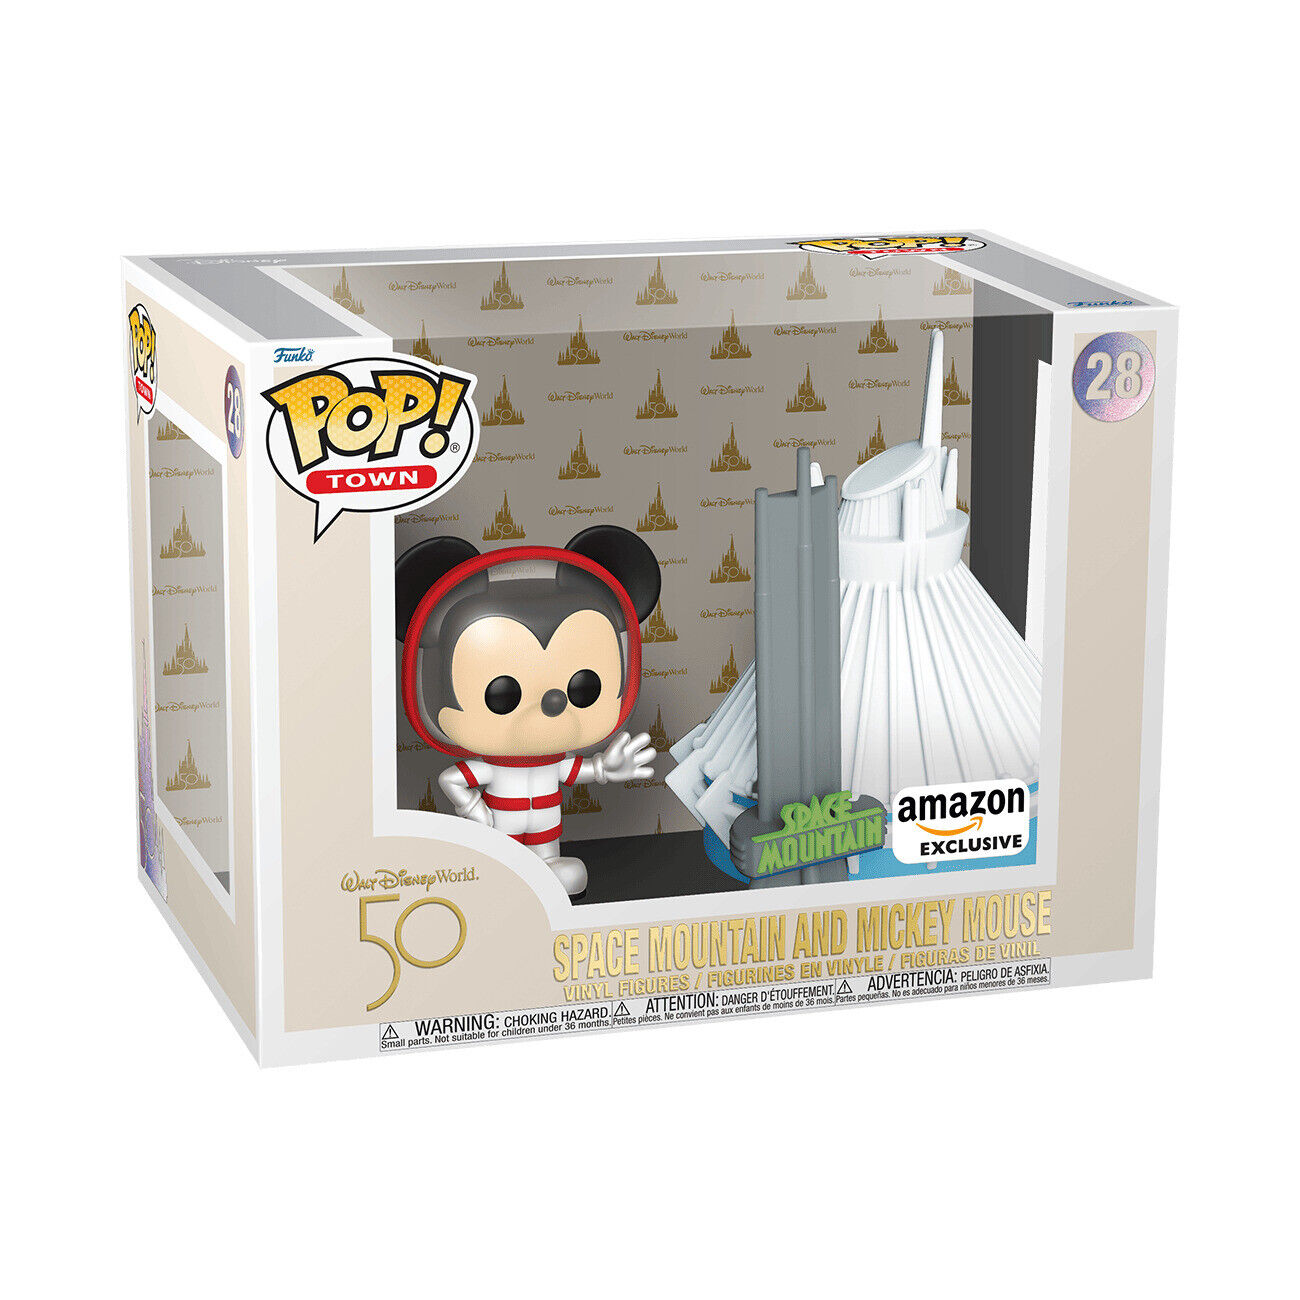 Funko Pop Town: Disney - Space Mountain and Mickey Mouse - Amazon (AM)